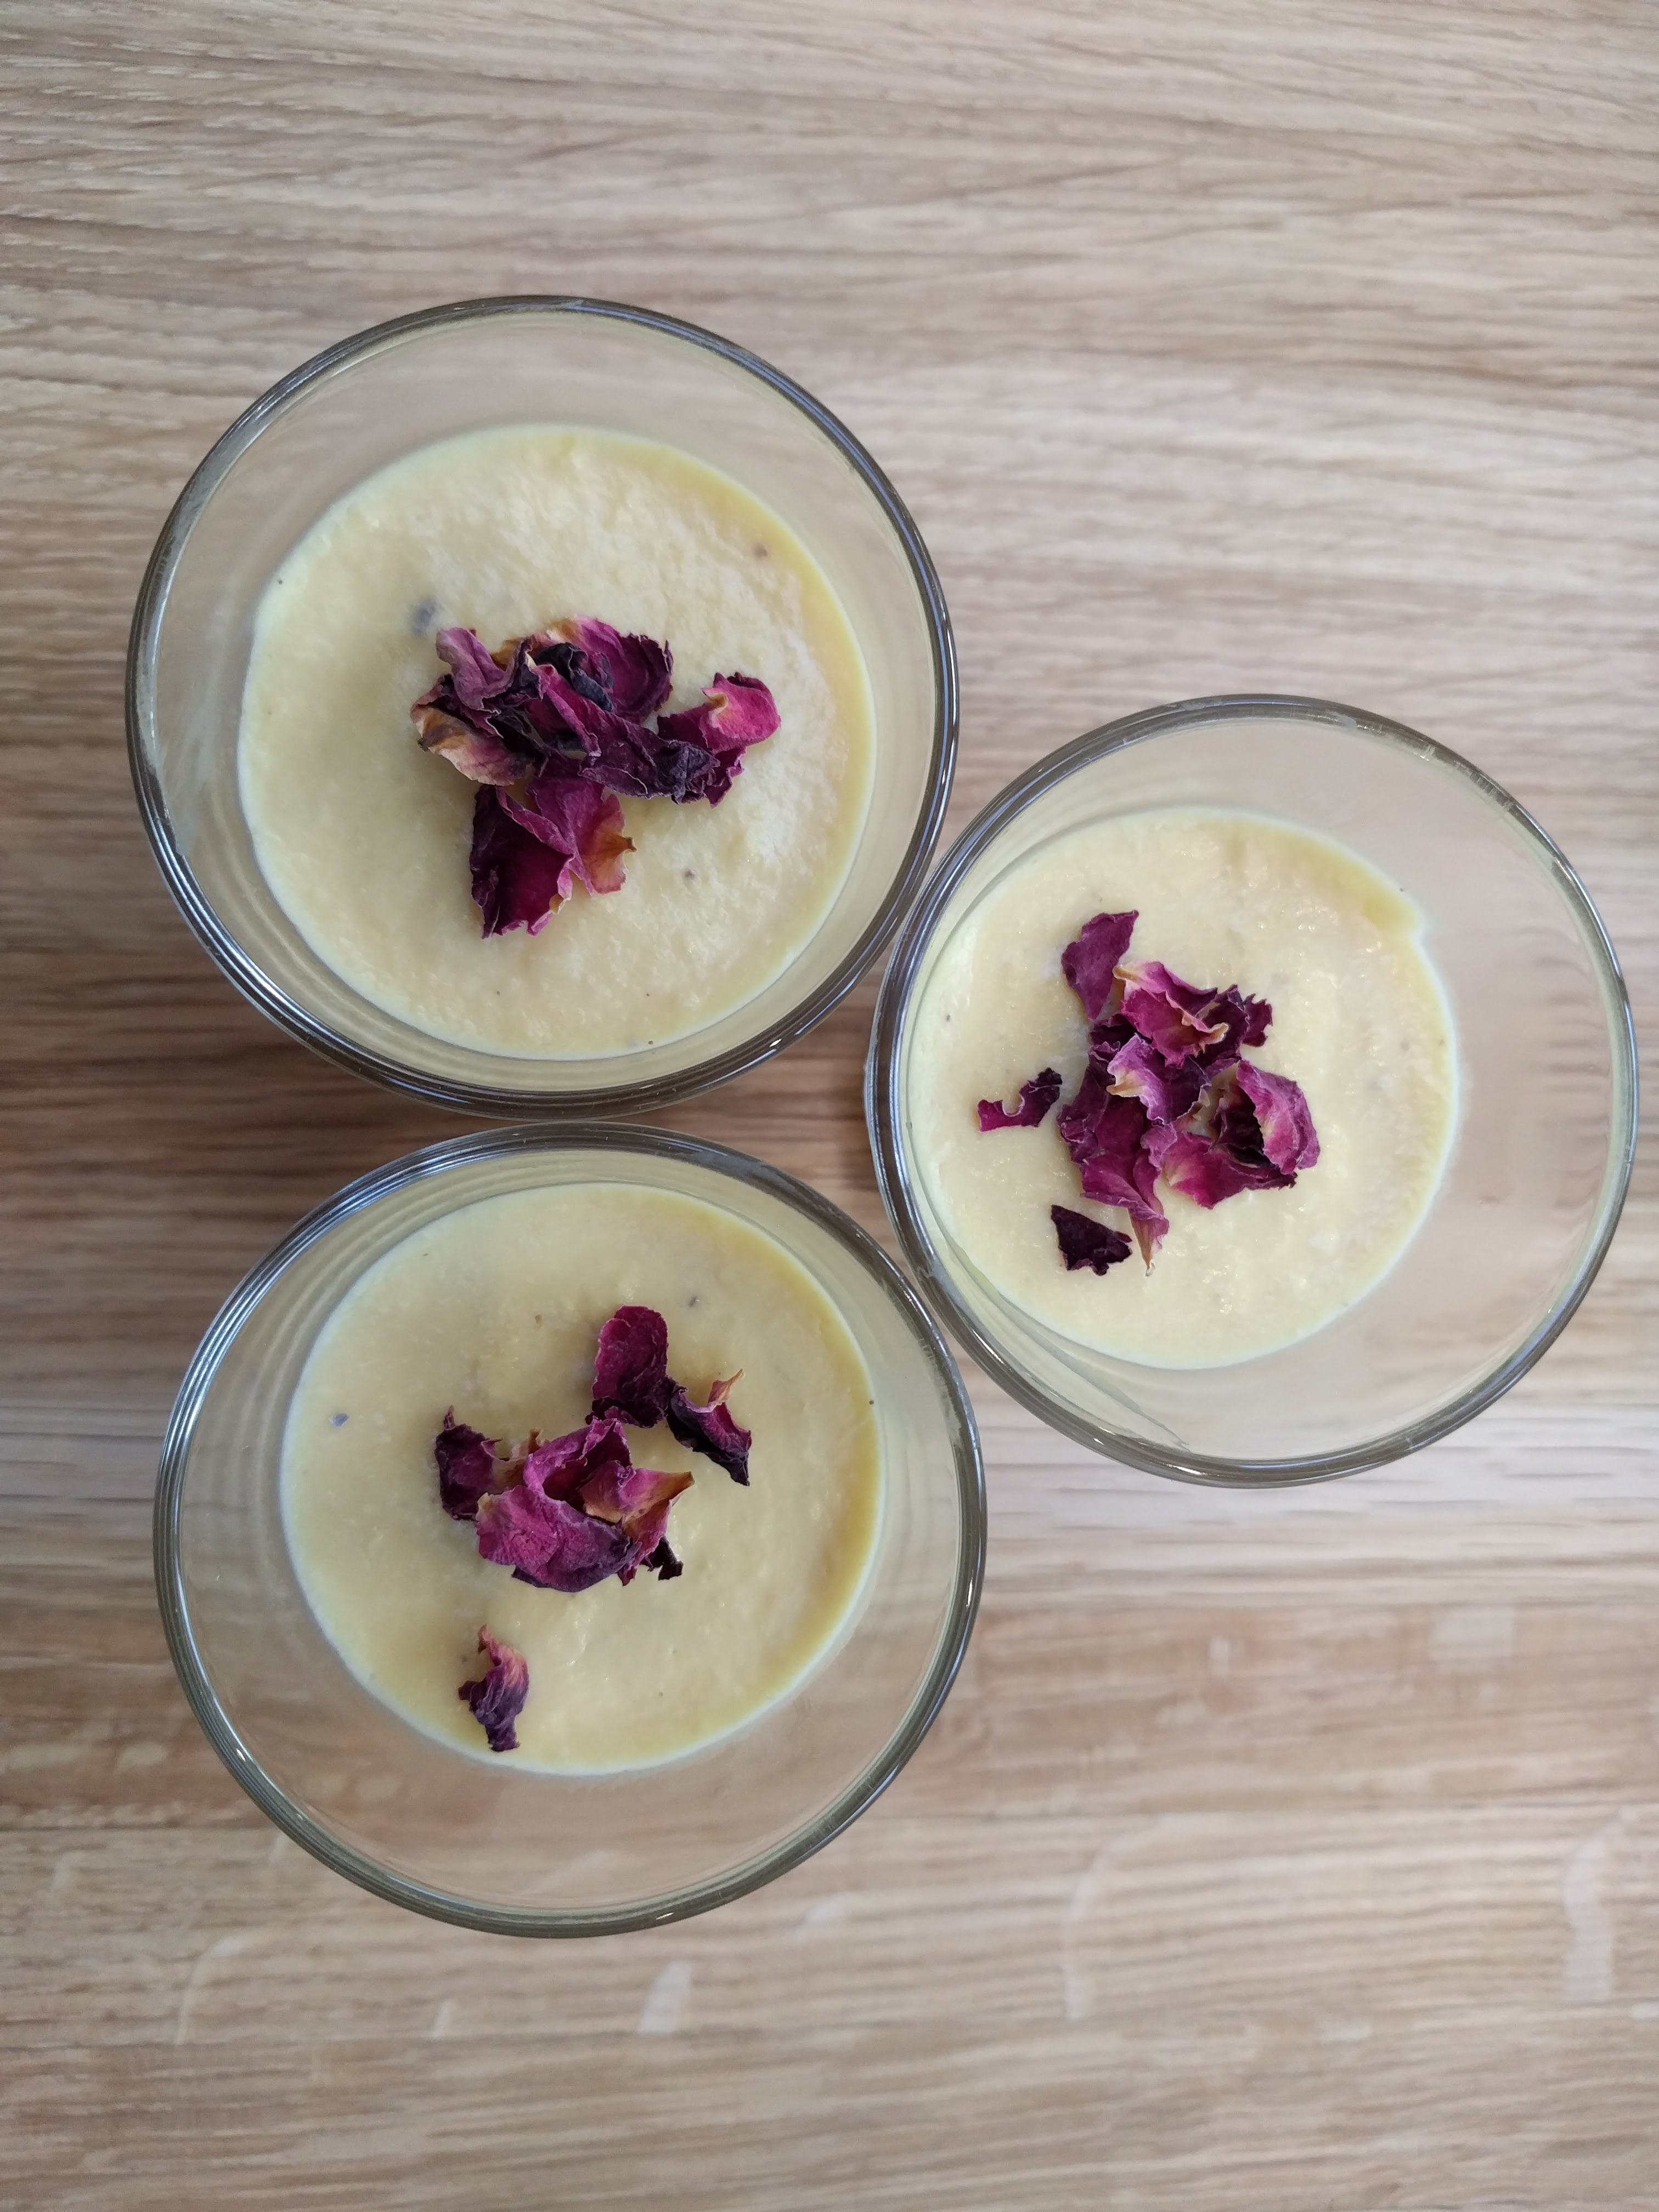 Mango Mahalabia with a touch of Sumac